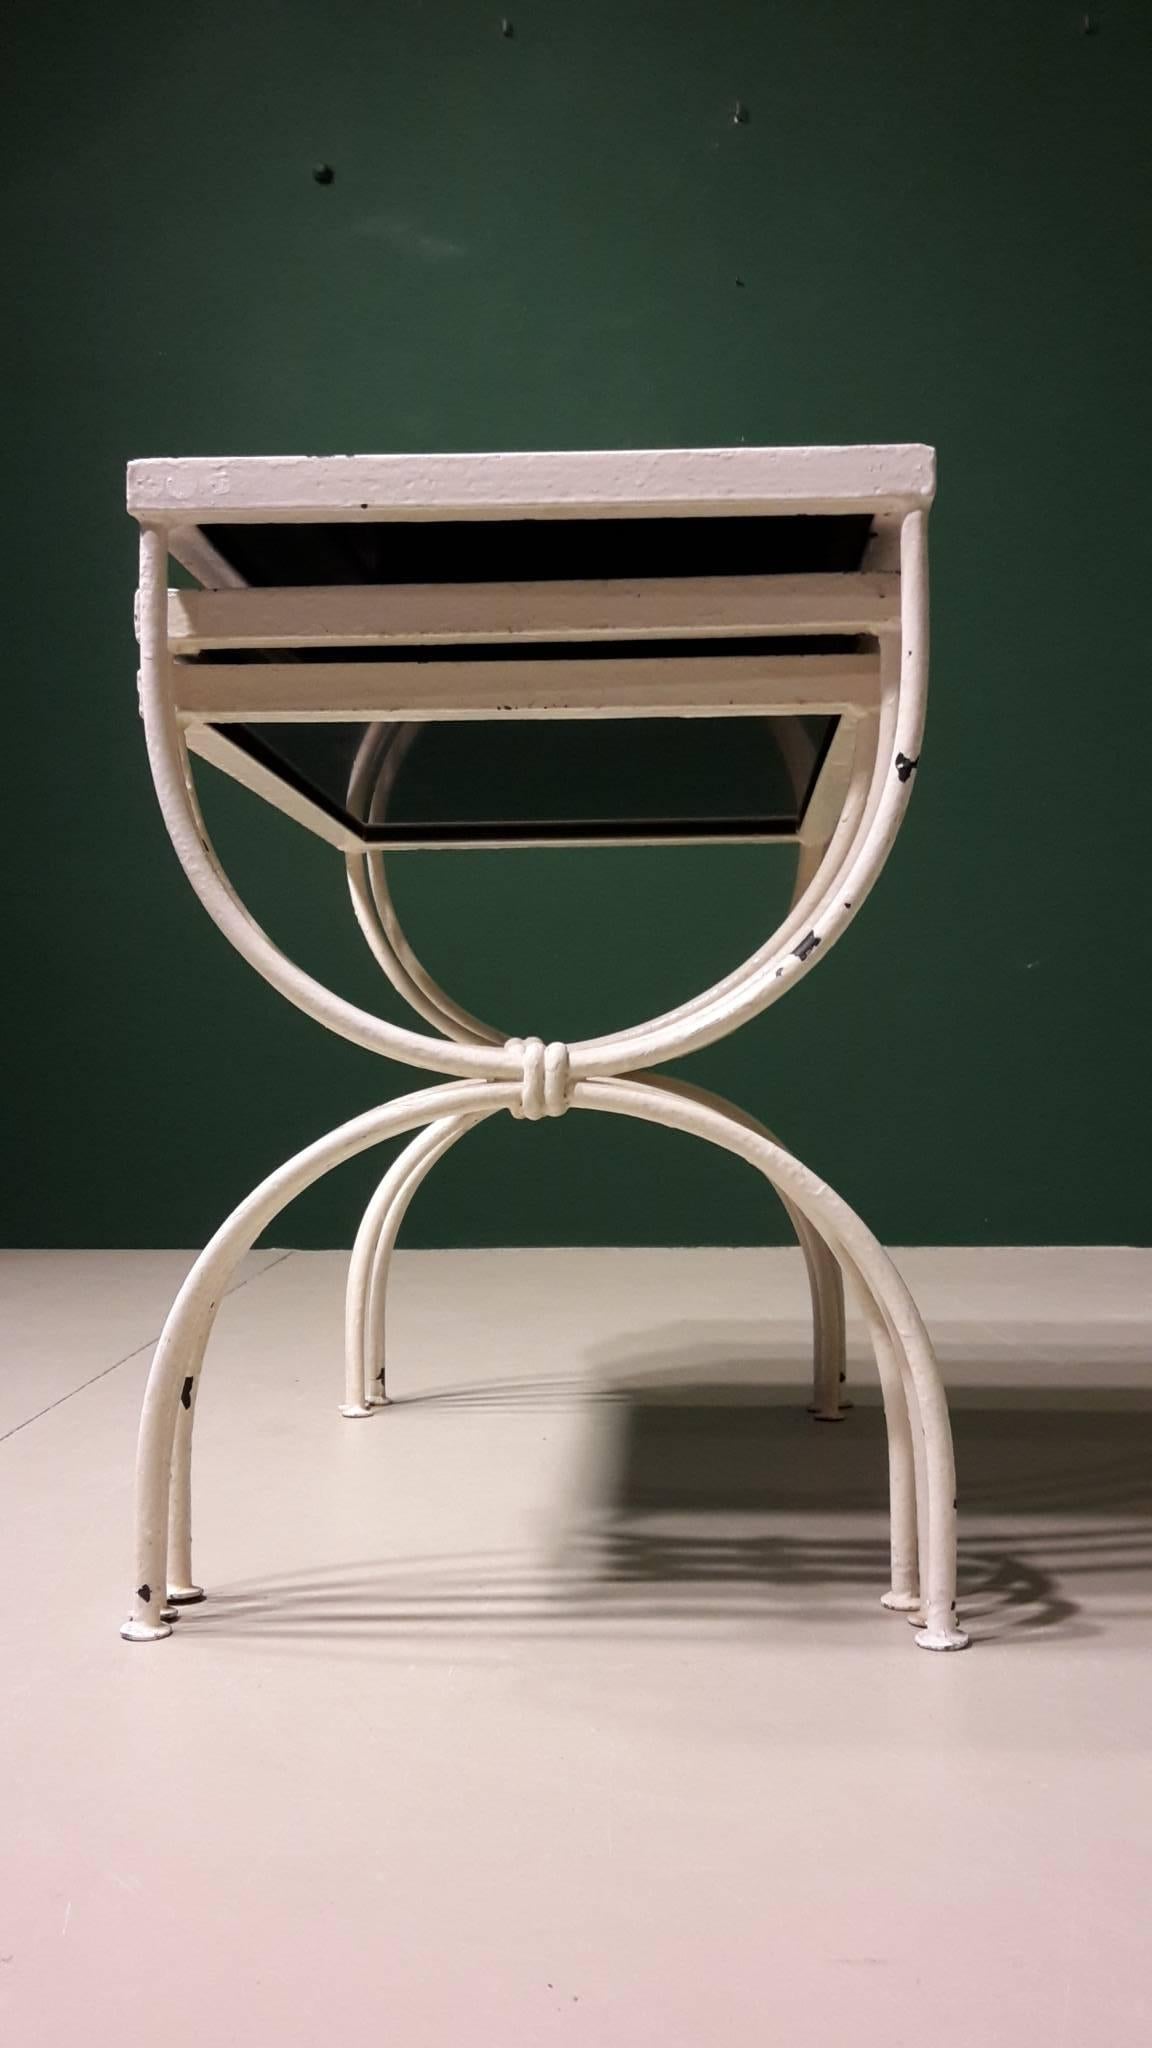 20th Century French Nest of Tables Made of White Metal and Black Glass, 1950s In Good Condition For Sale In Berlin, DE